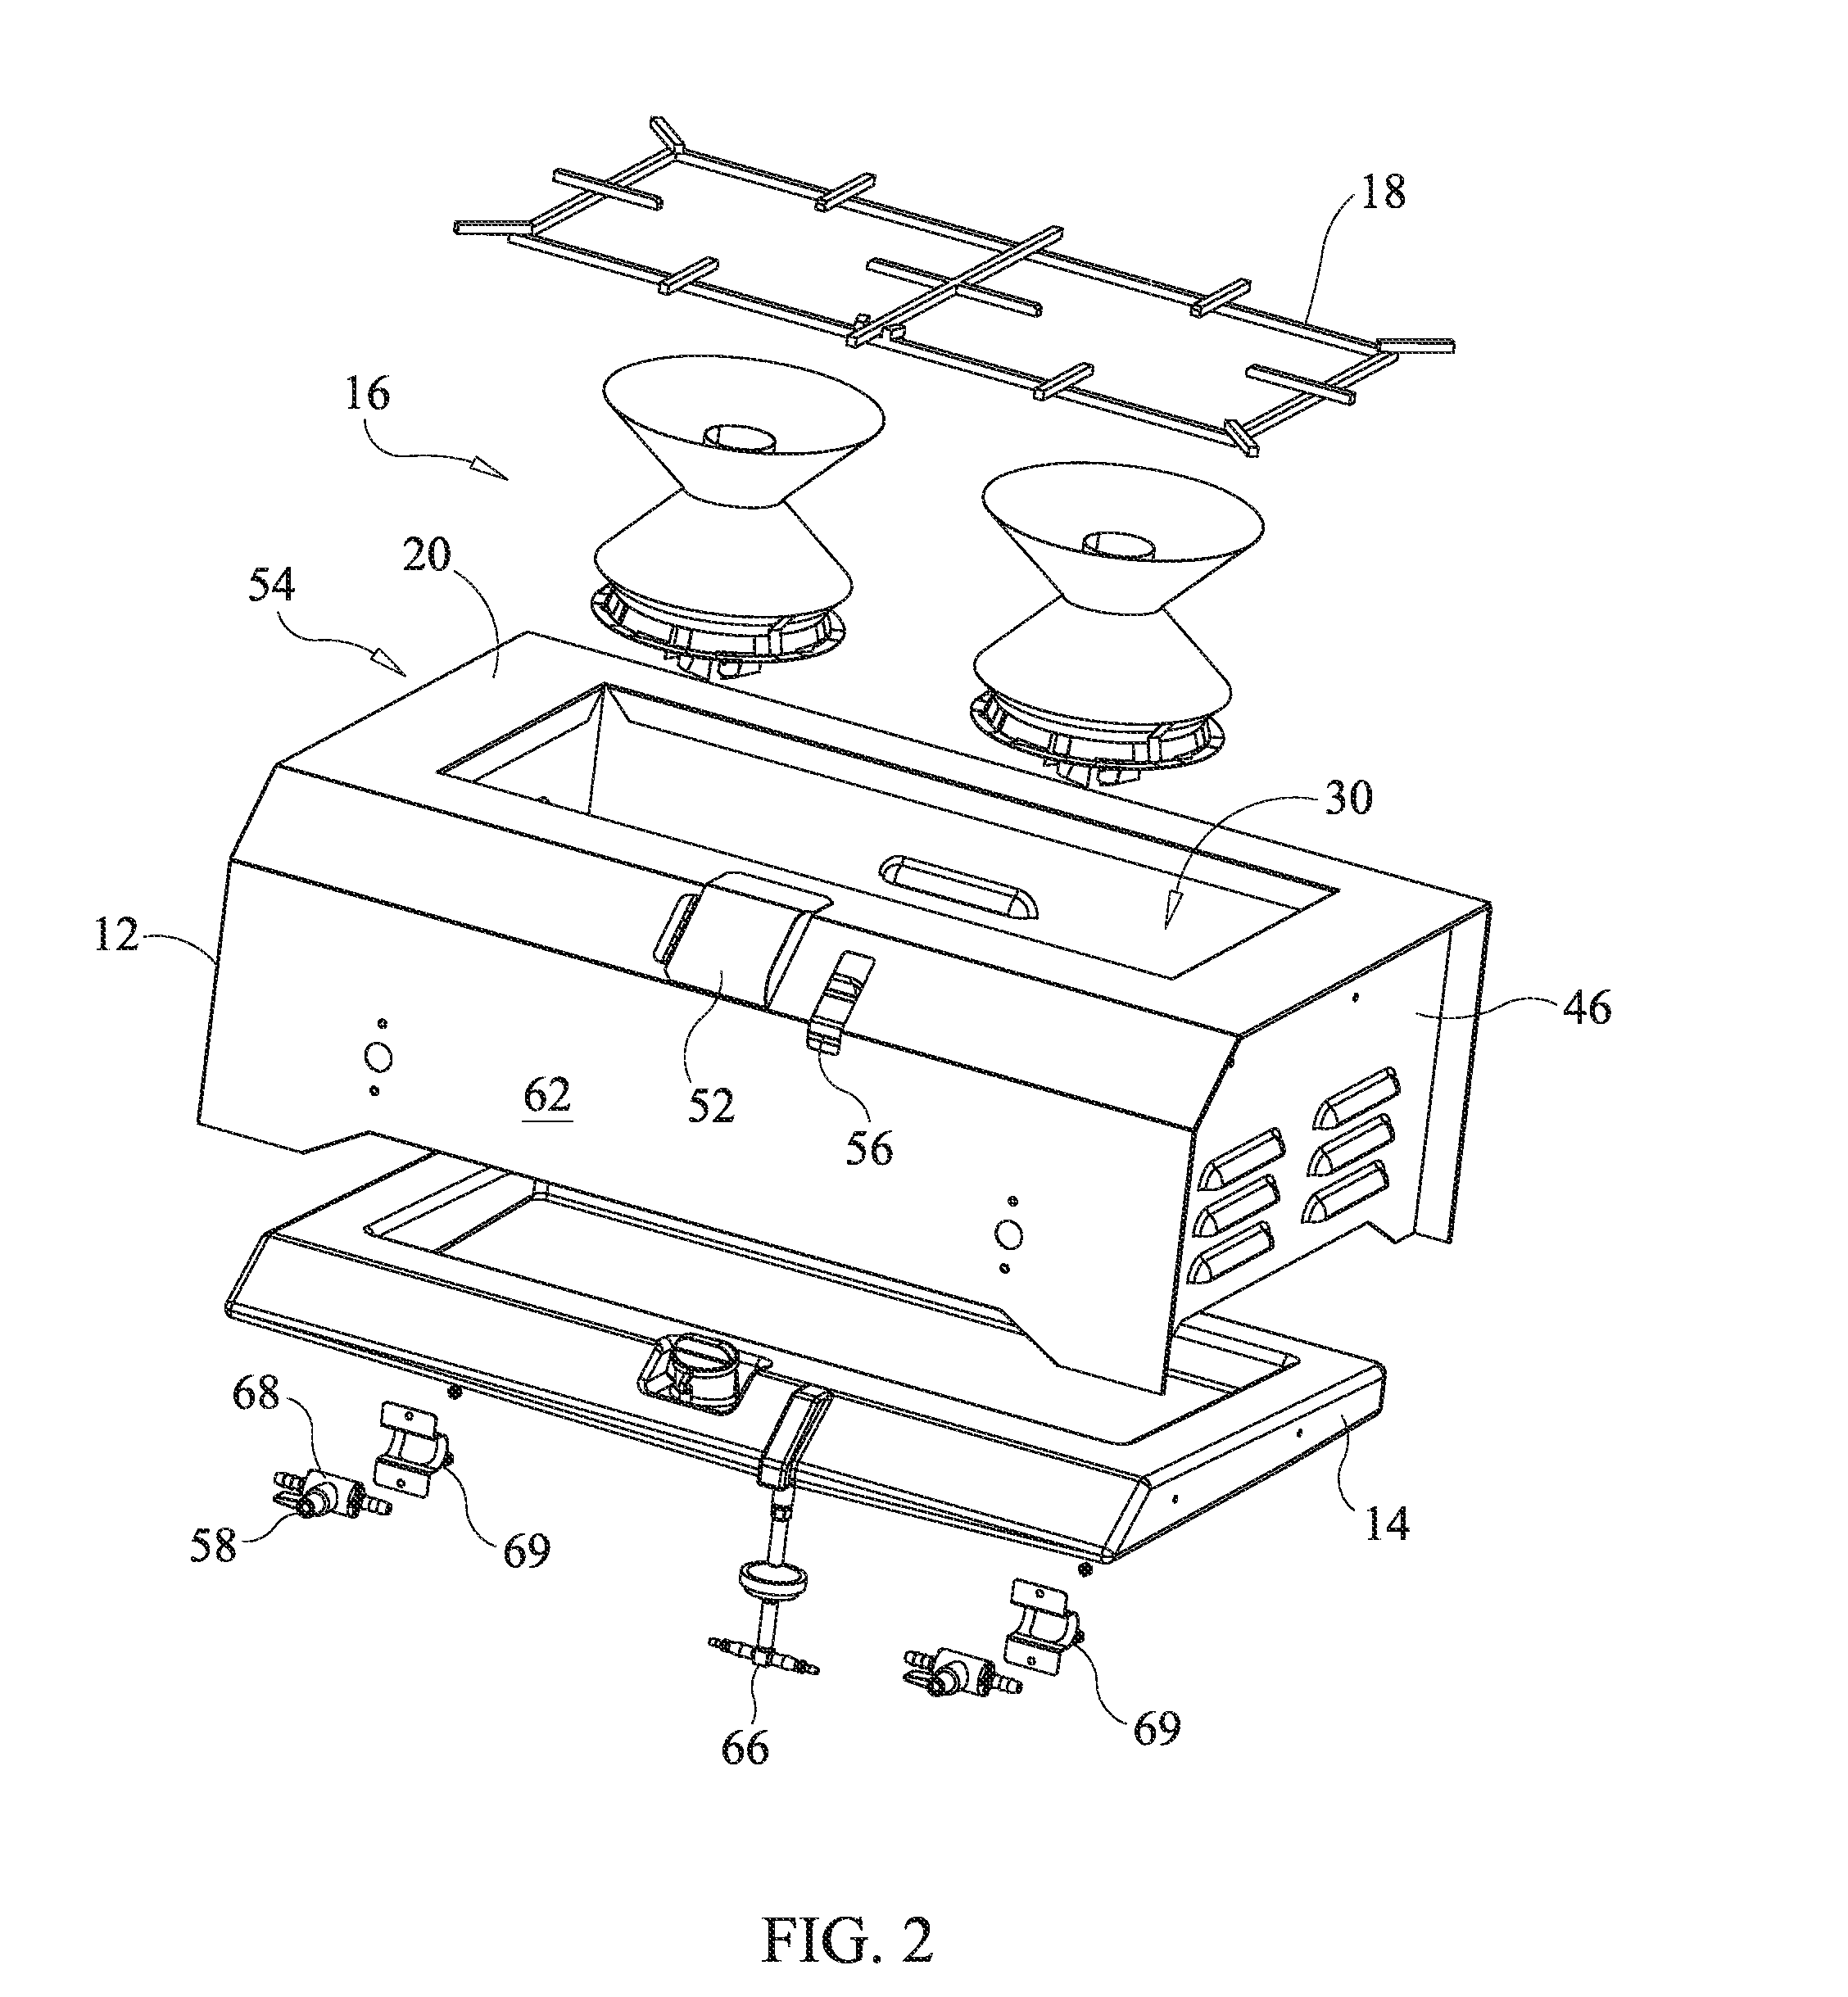 Cooking stove